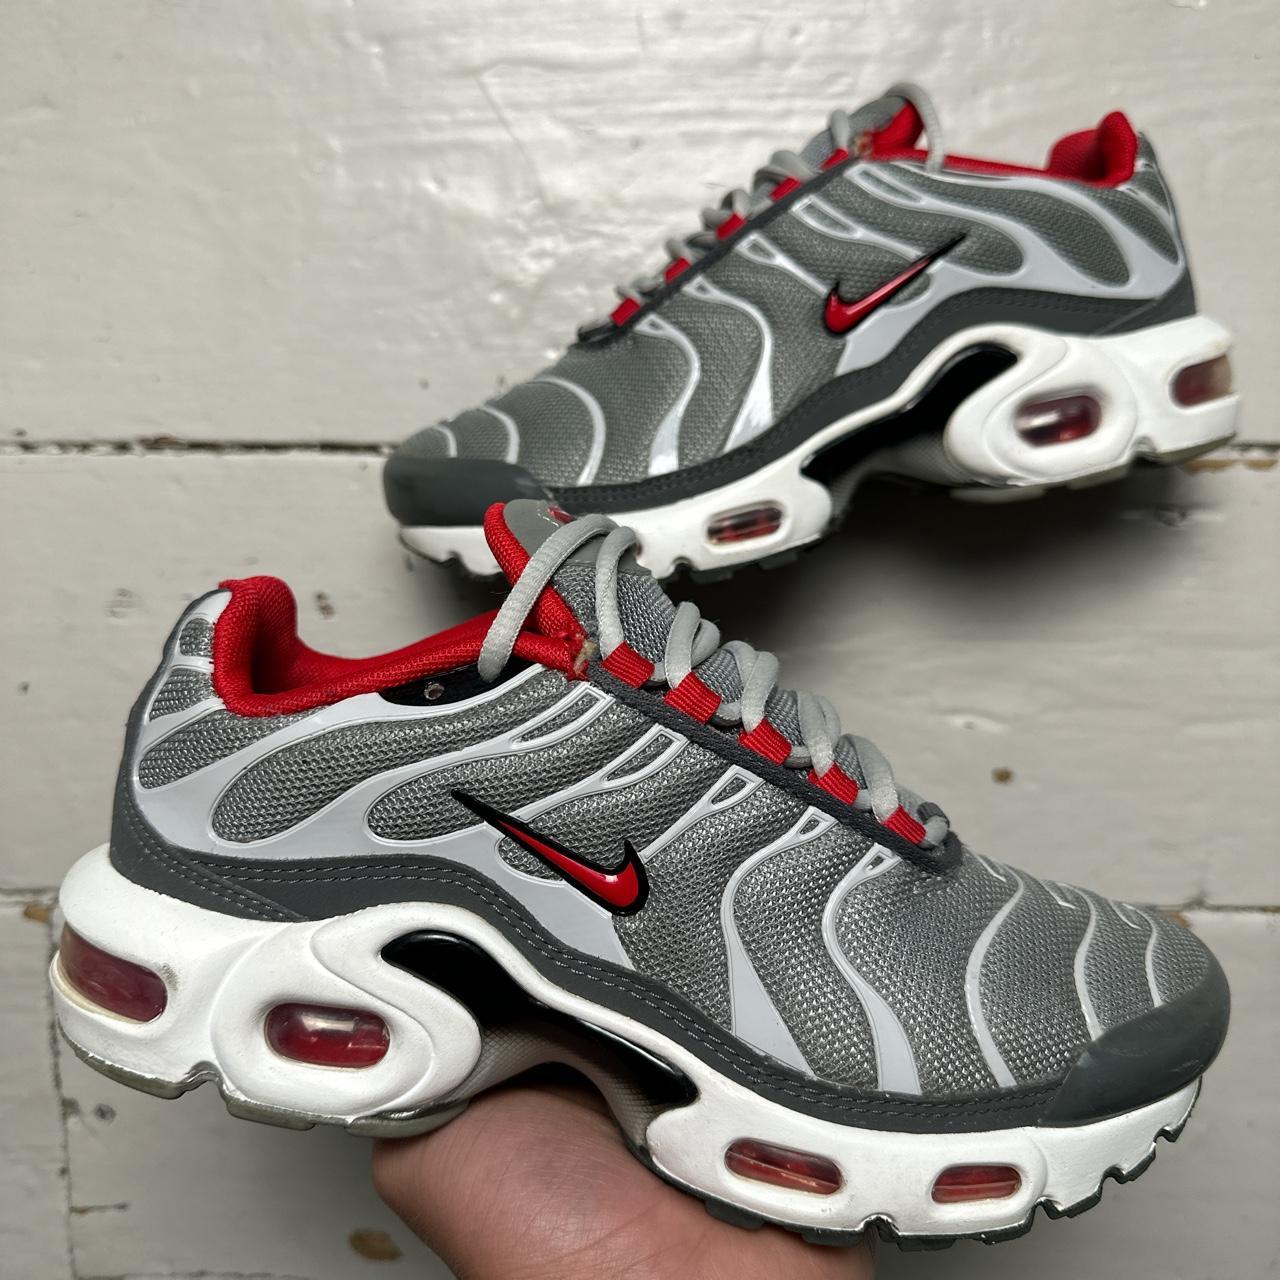 Nike TN Air Max Plus Grey Silver and University Red